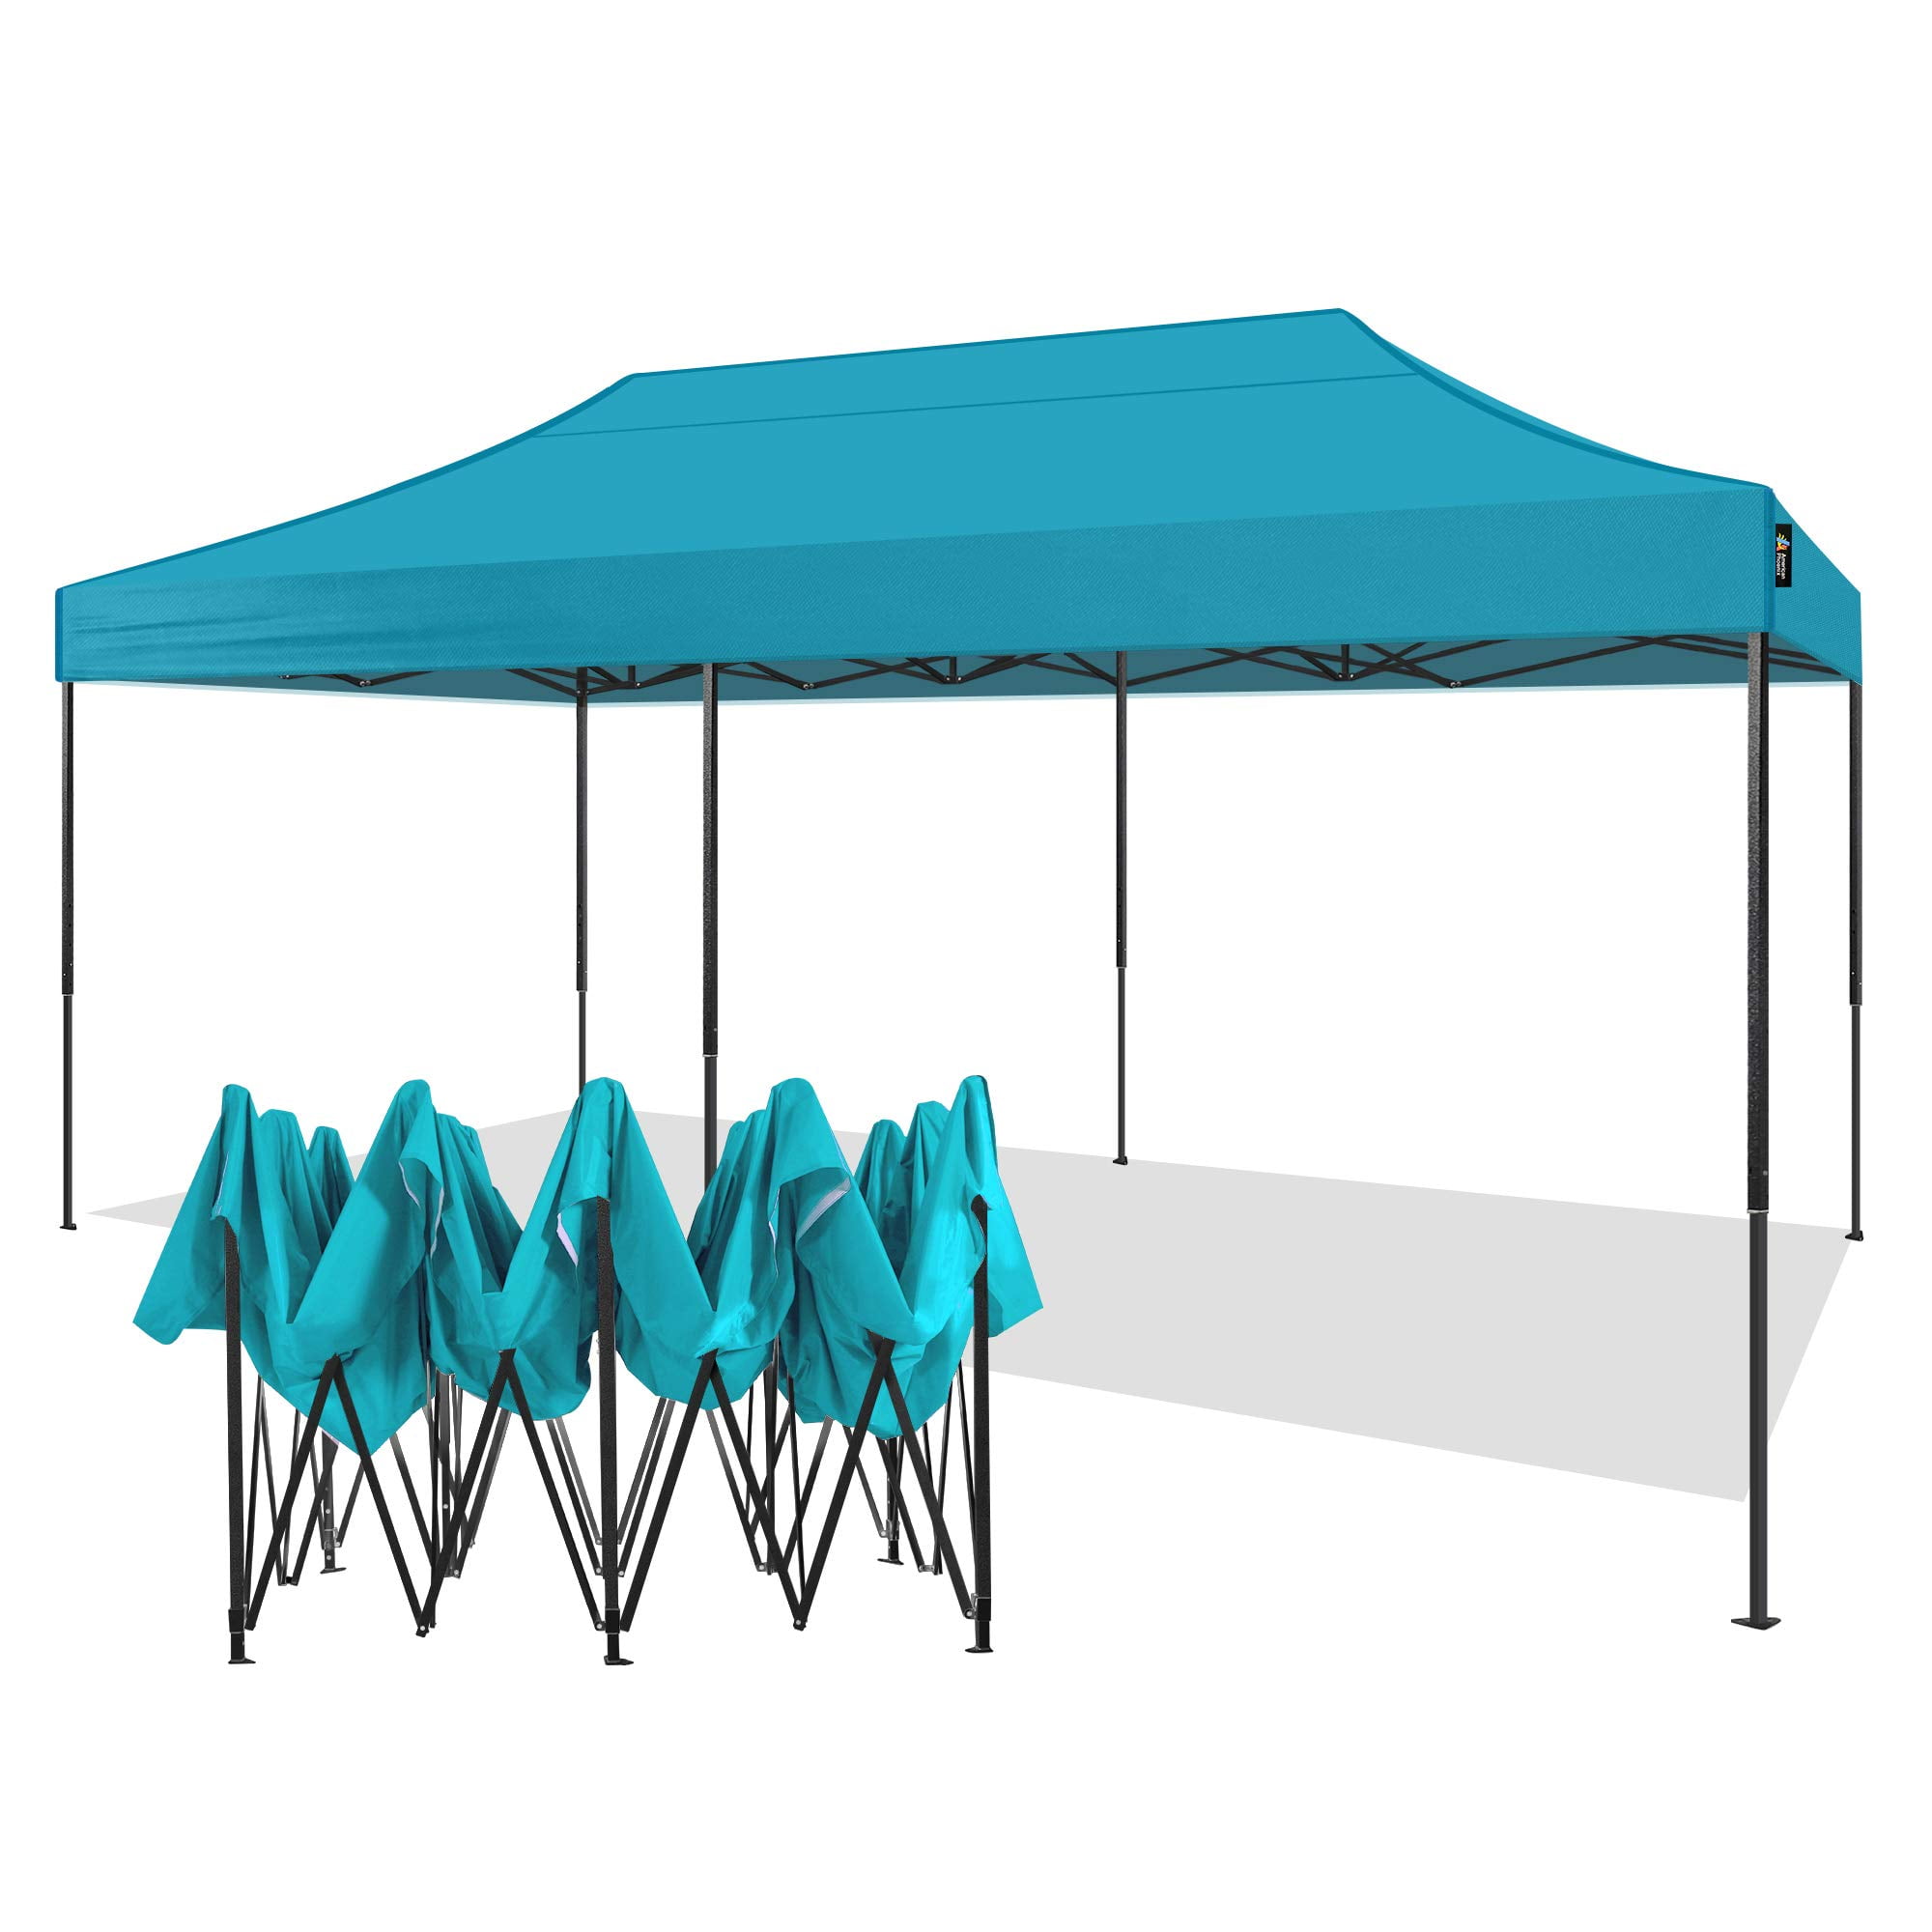 10x20, Teal American Phoenix Canopy Top Cover Replacement Cloth Only Top Fabric